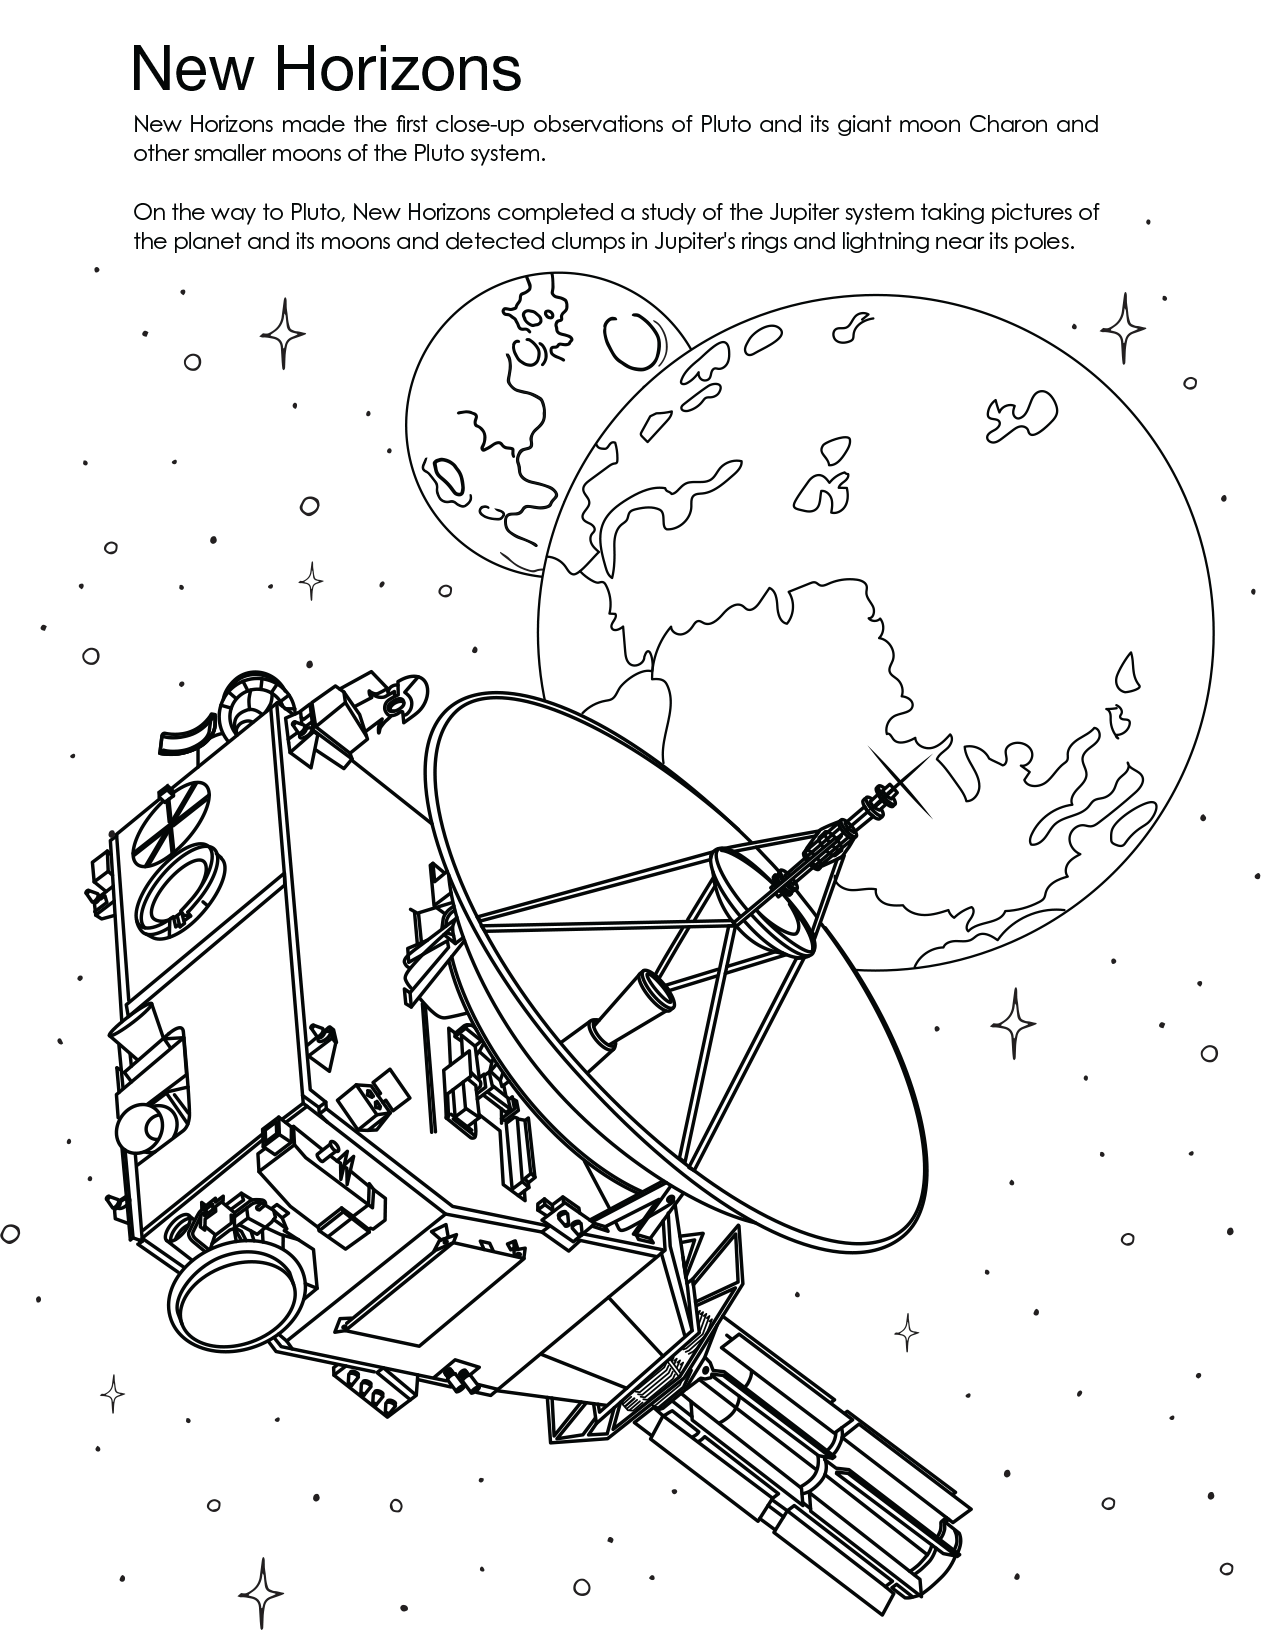 Coloring page for New Horizons.